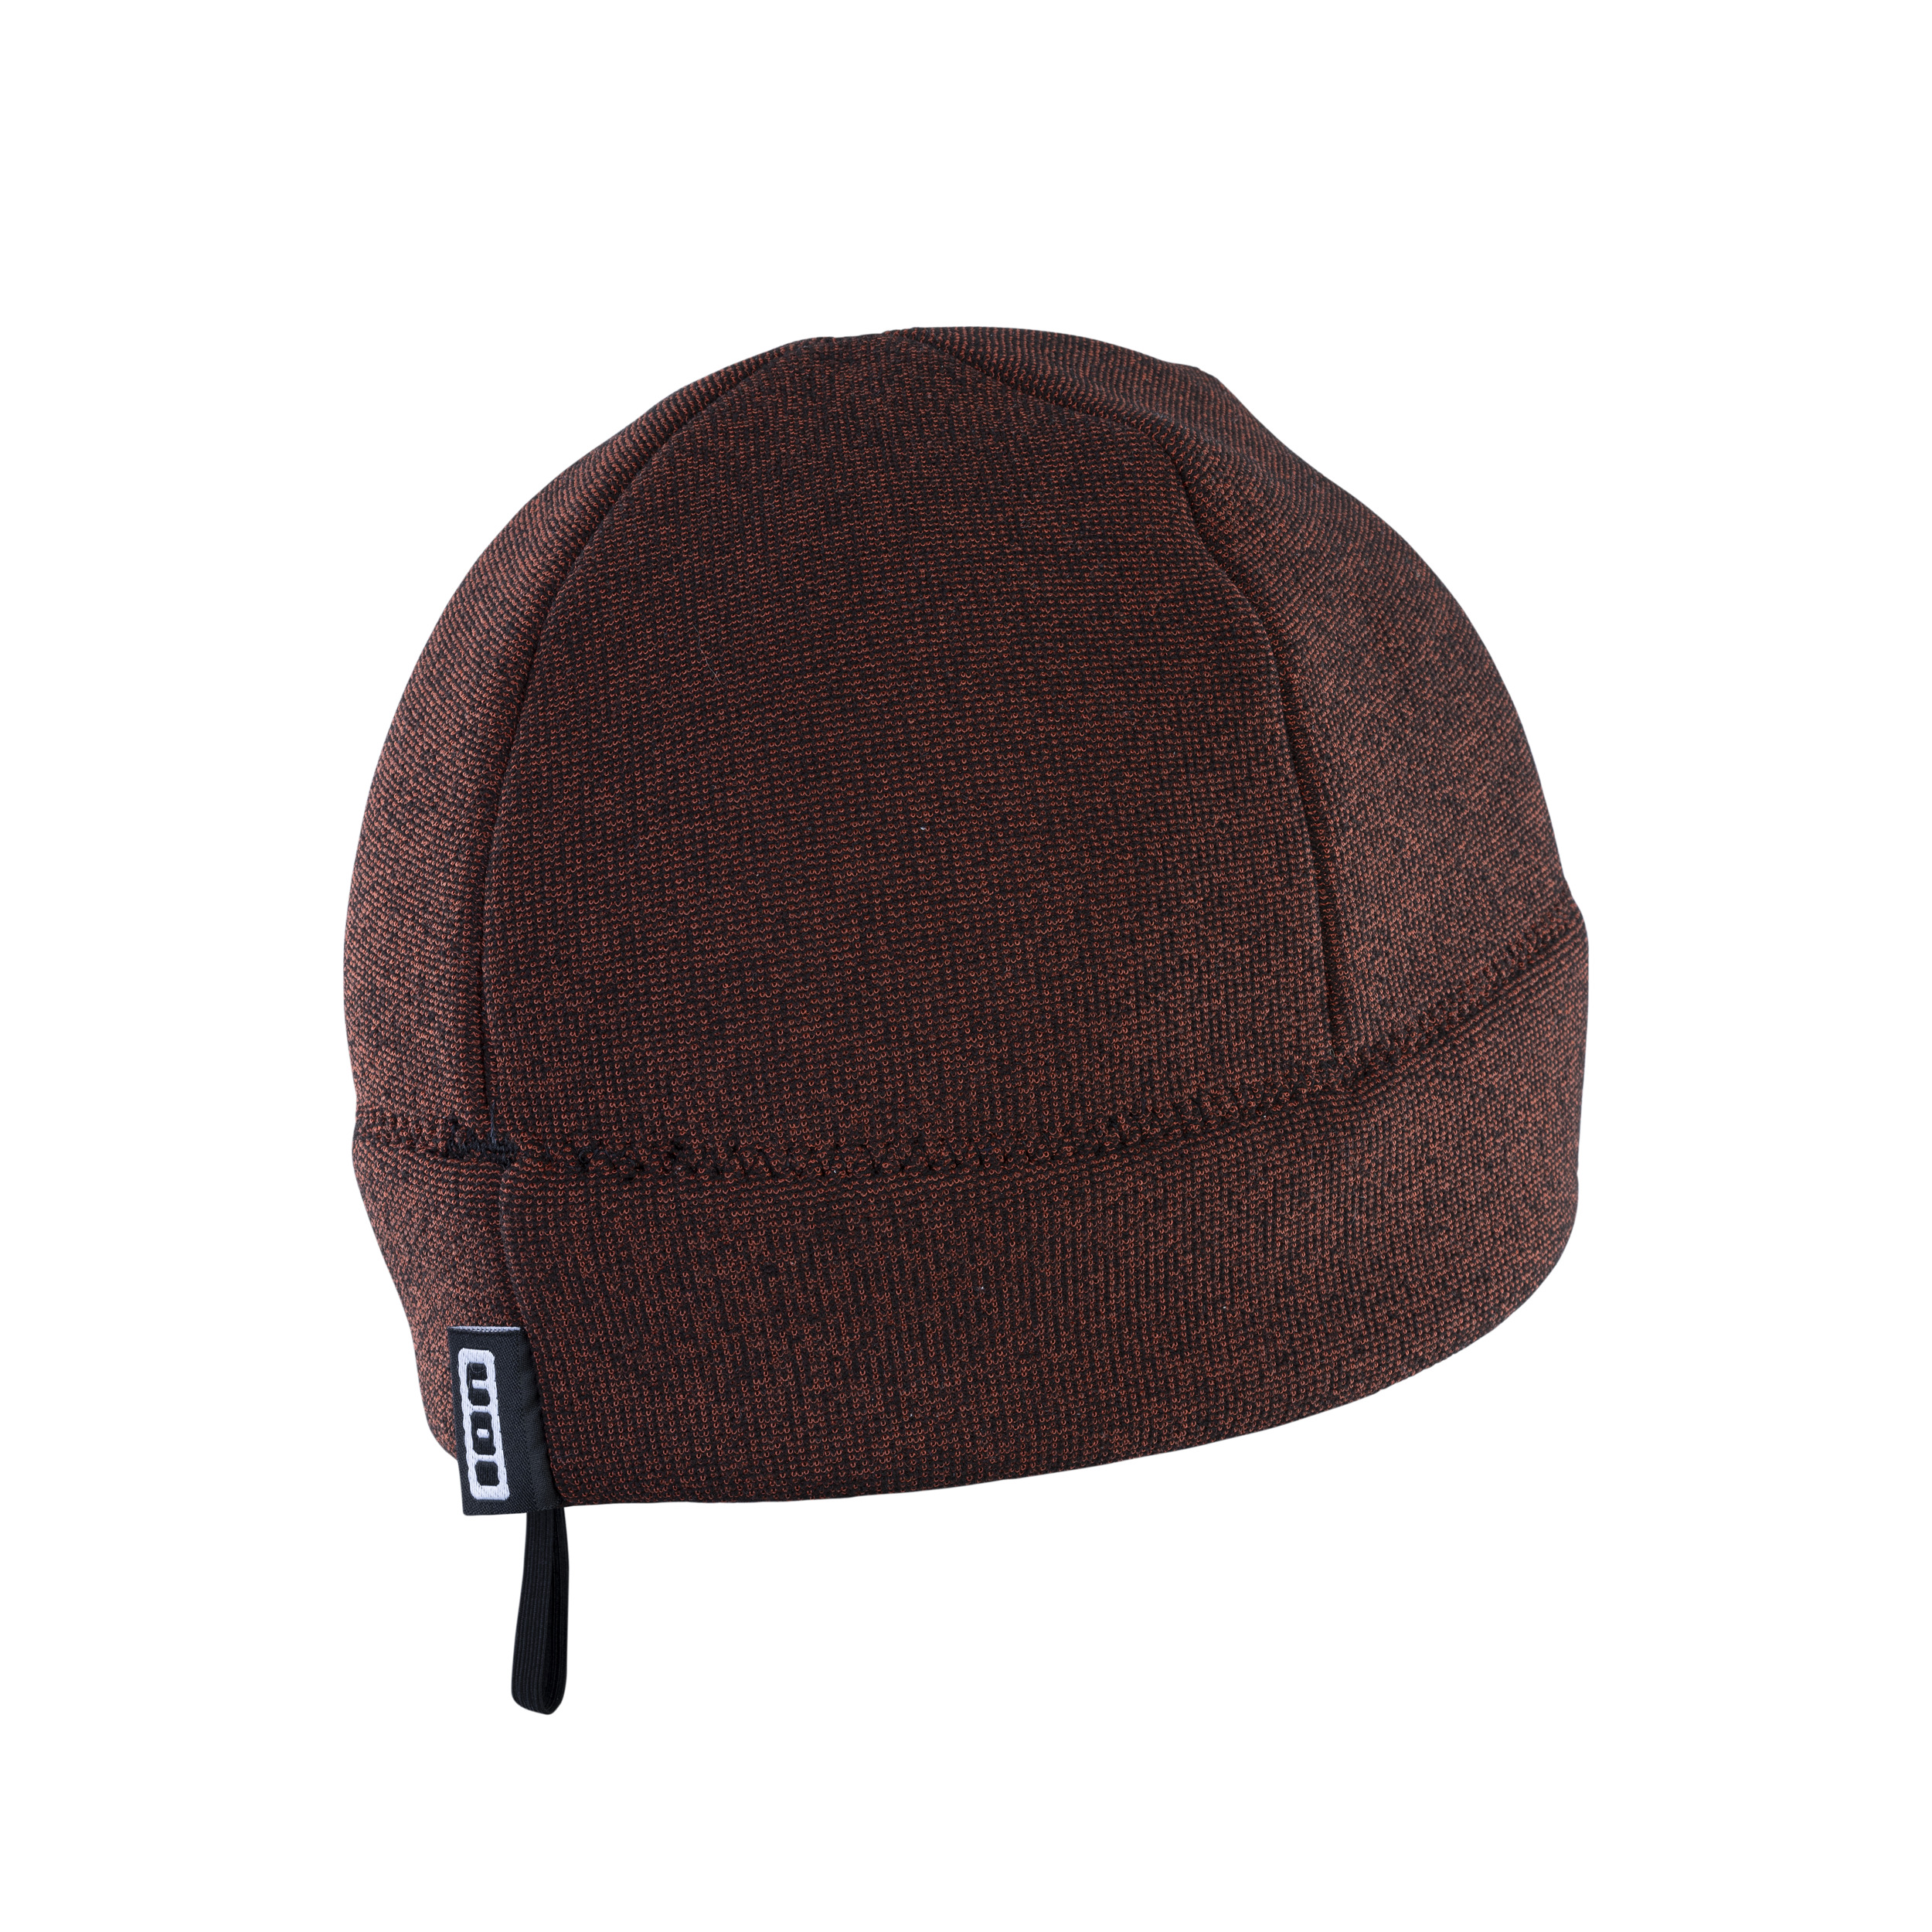 ION  Wooly Beanie  2,5 (48130-4110) / 24 (48/S)-